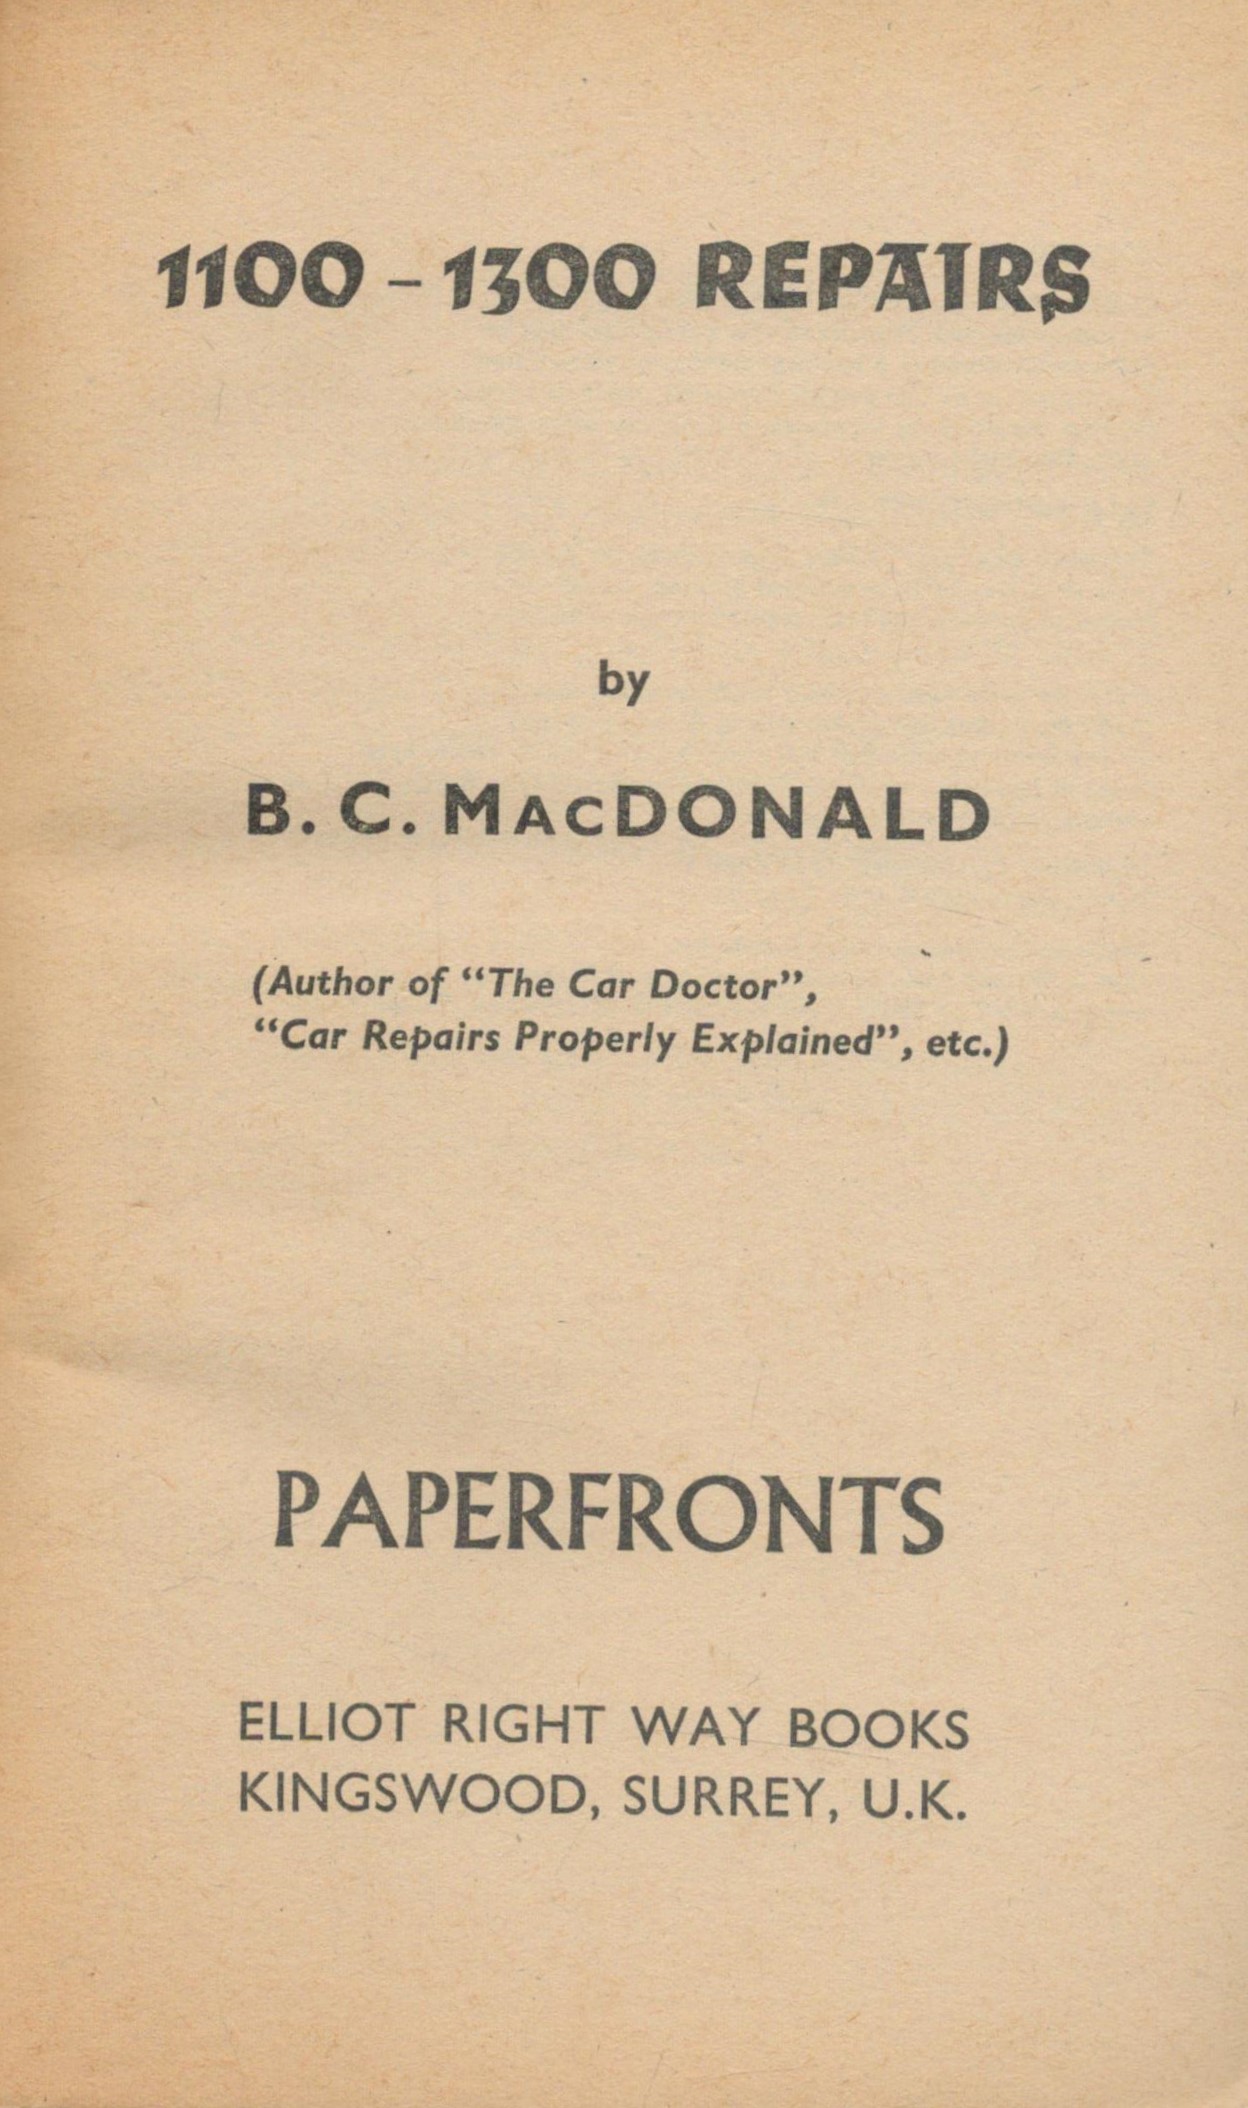 BLMC 1100 and 1300 Repairs by B C Macdonald 1970 First Edition Softback Book with 156 pages - Image 2 of 3